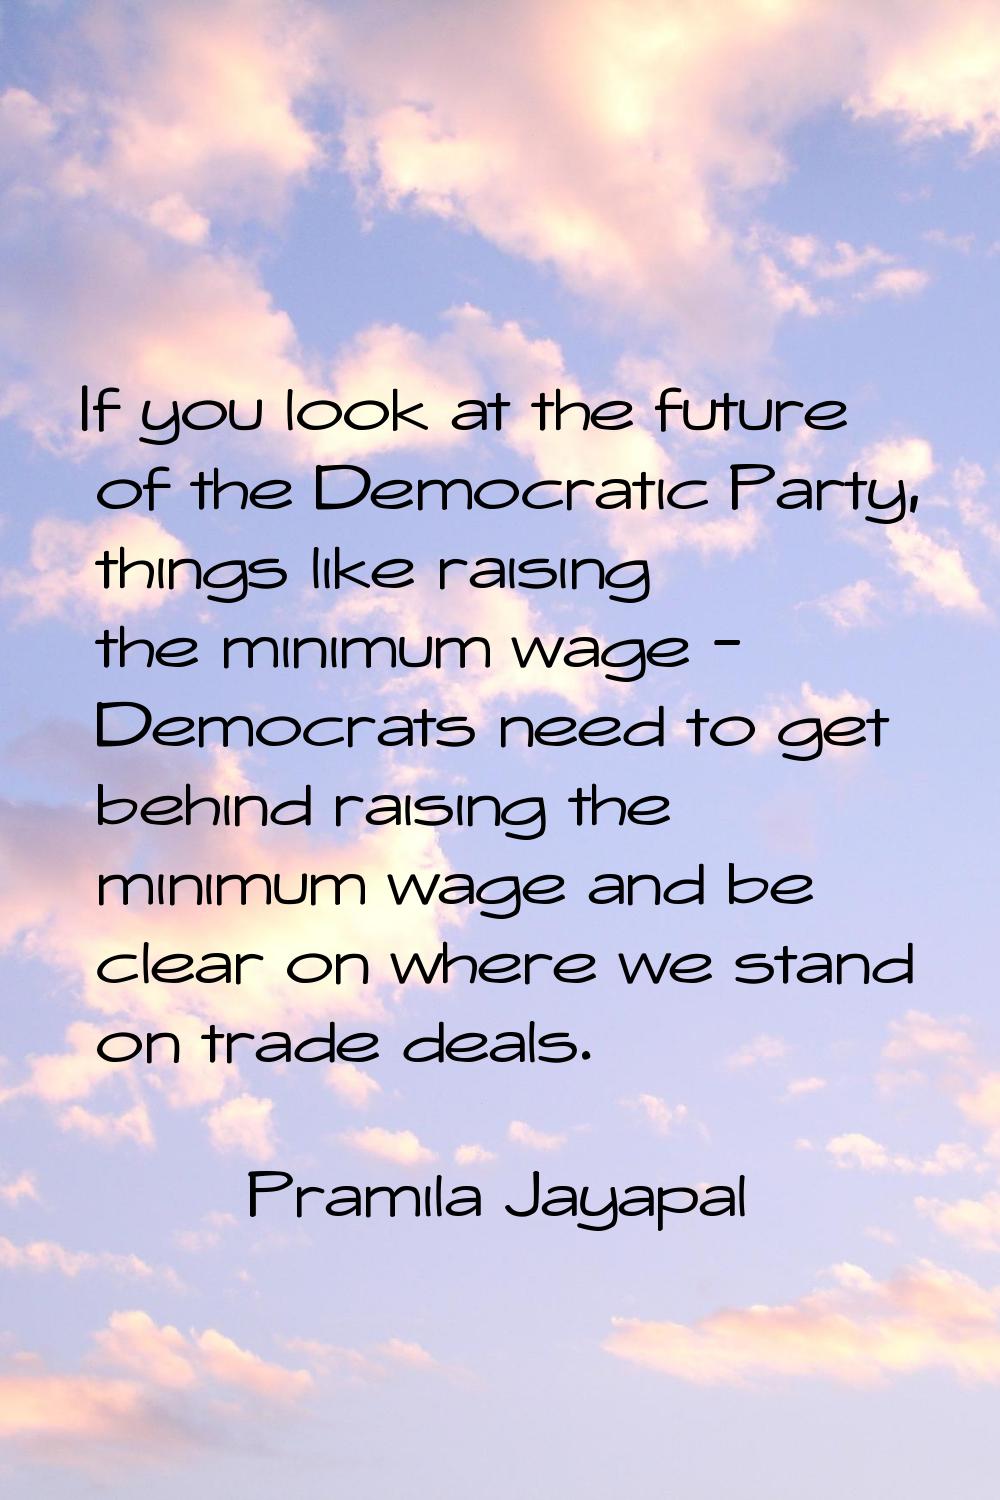 If you look at the future of the Democratic Party, things like raising the minimum wage - Democrats